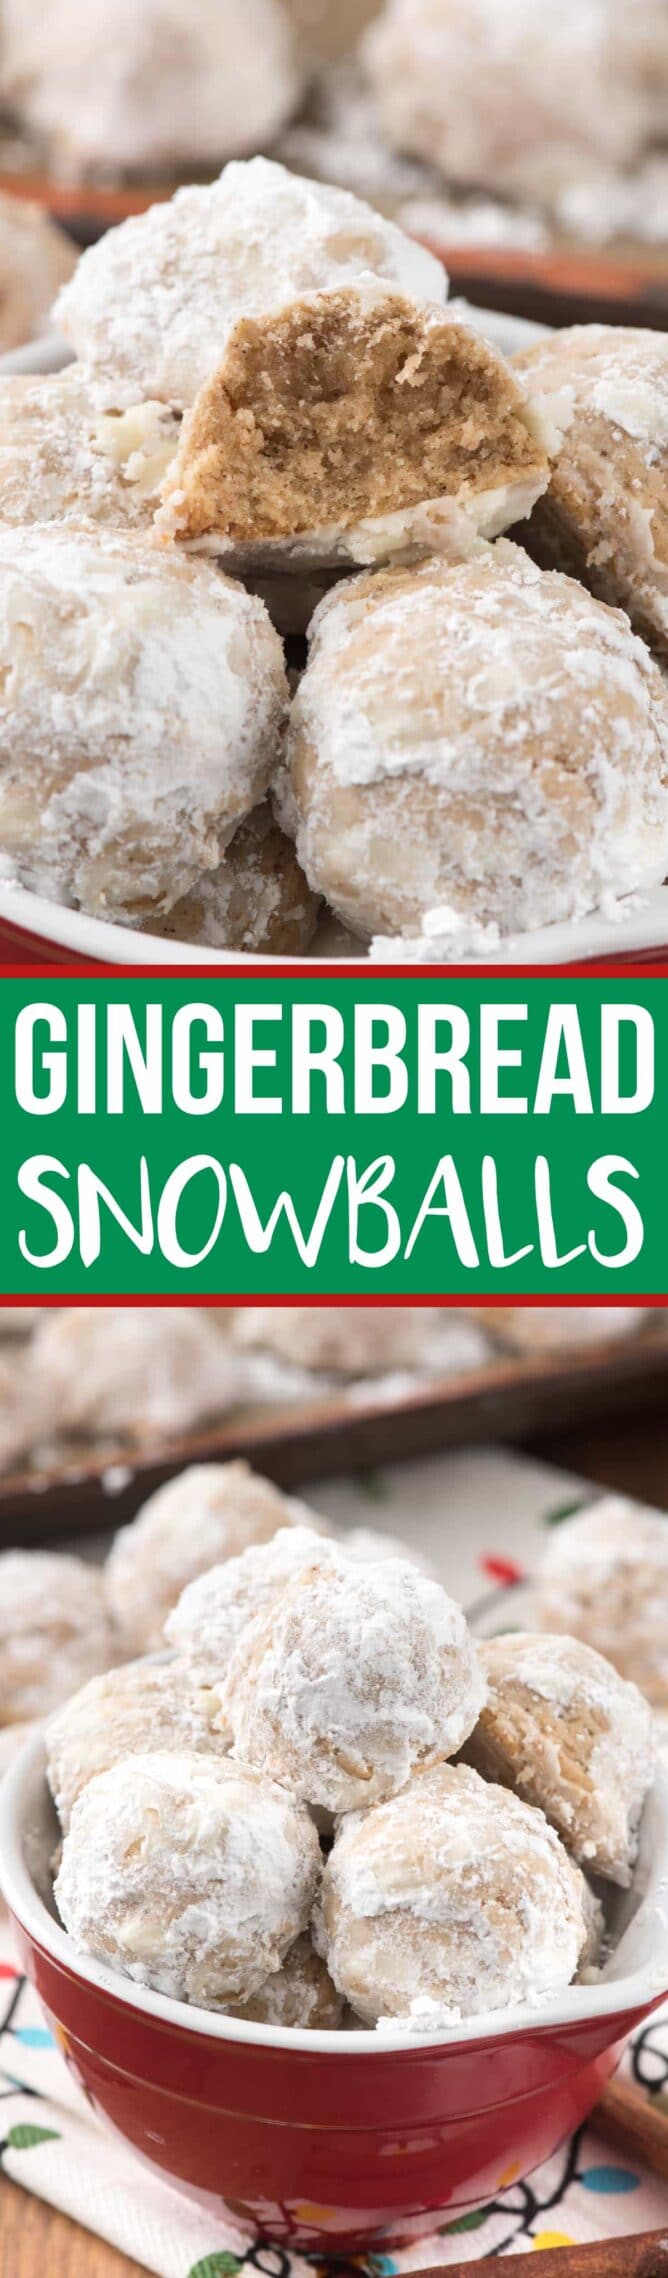 Collage of Gingerbread Snowballs